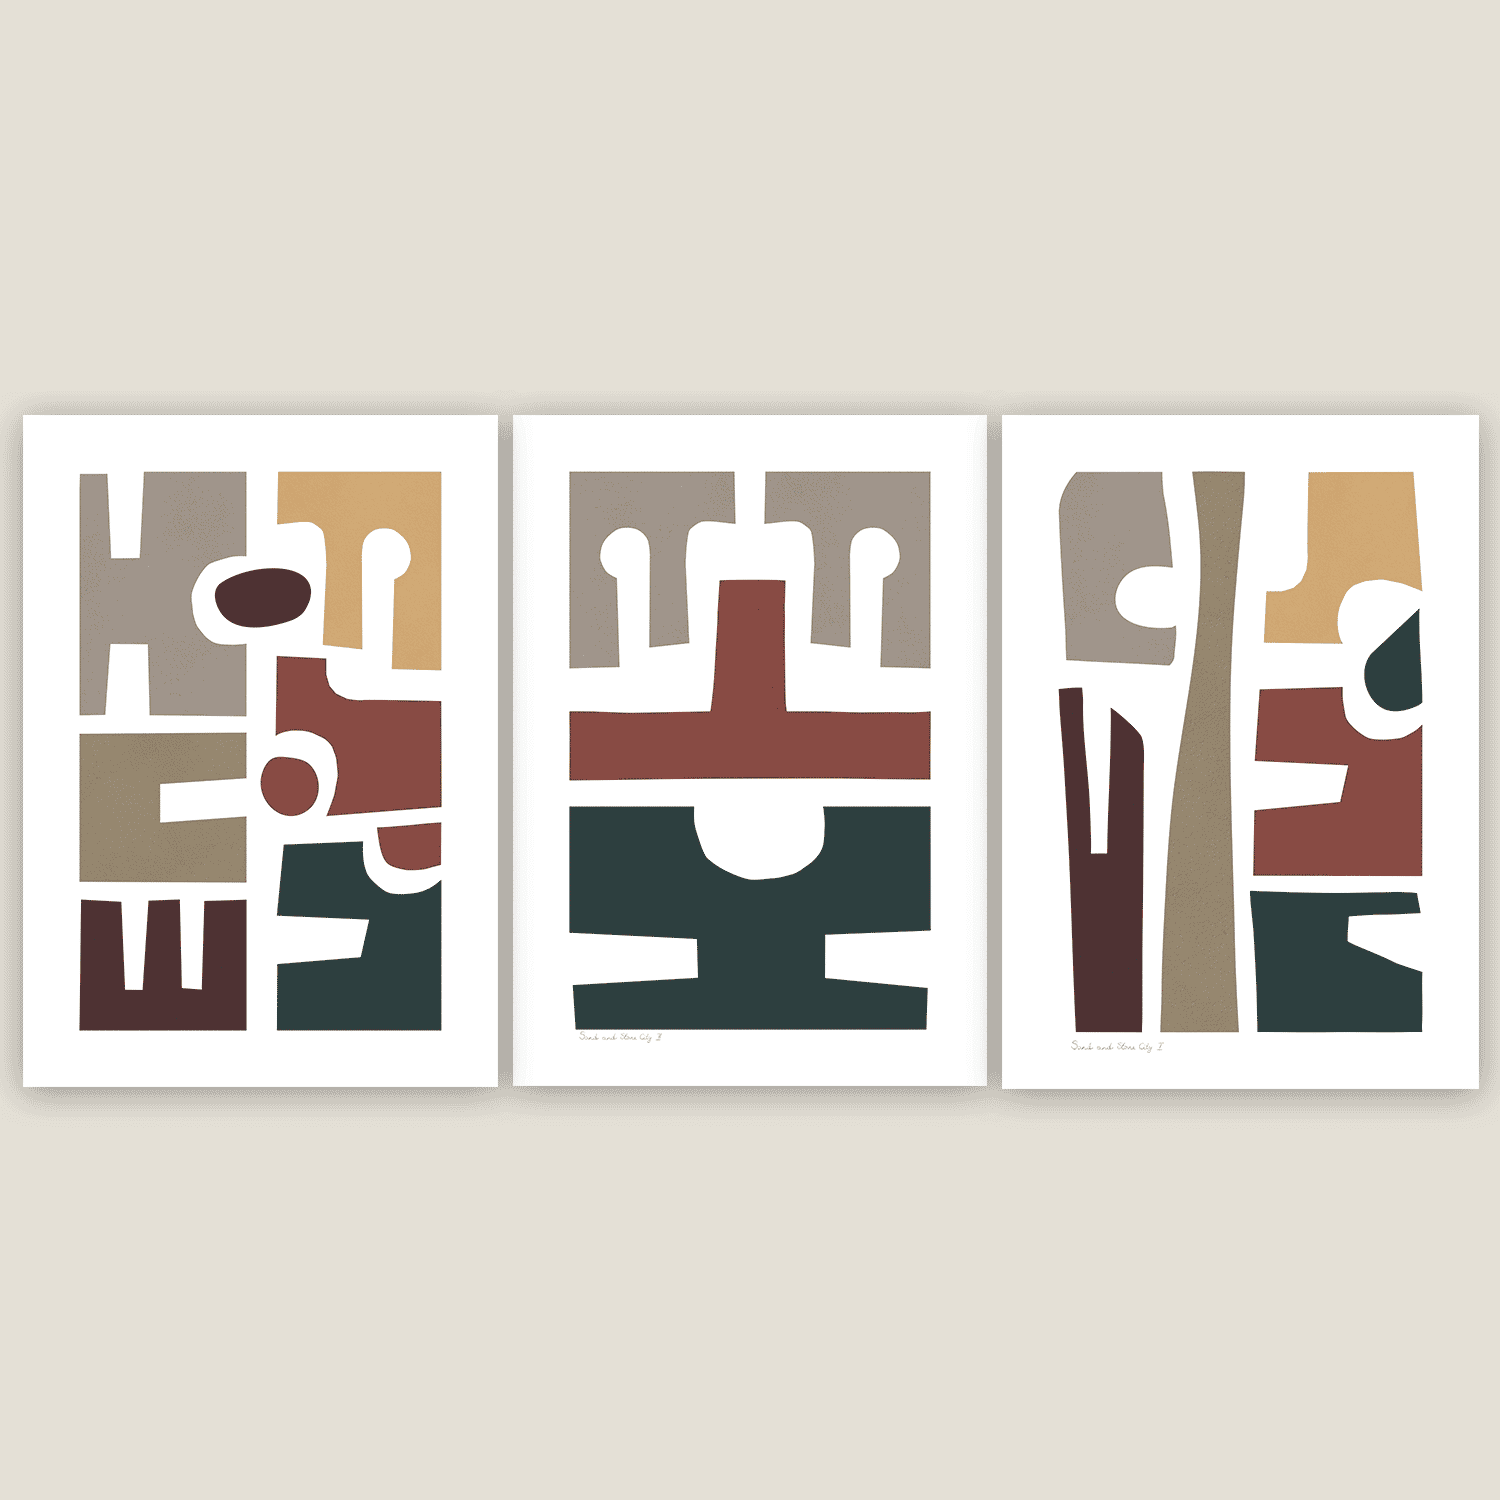 Set of 3 Prints "Sand and Stone City"